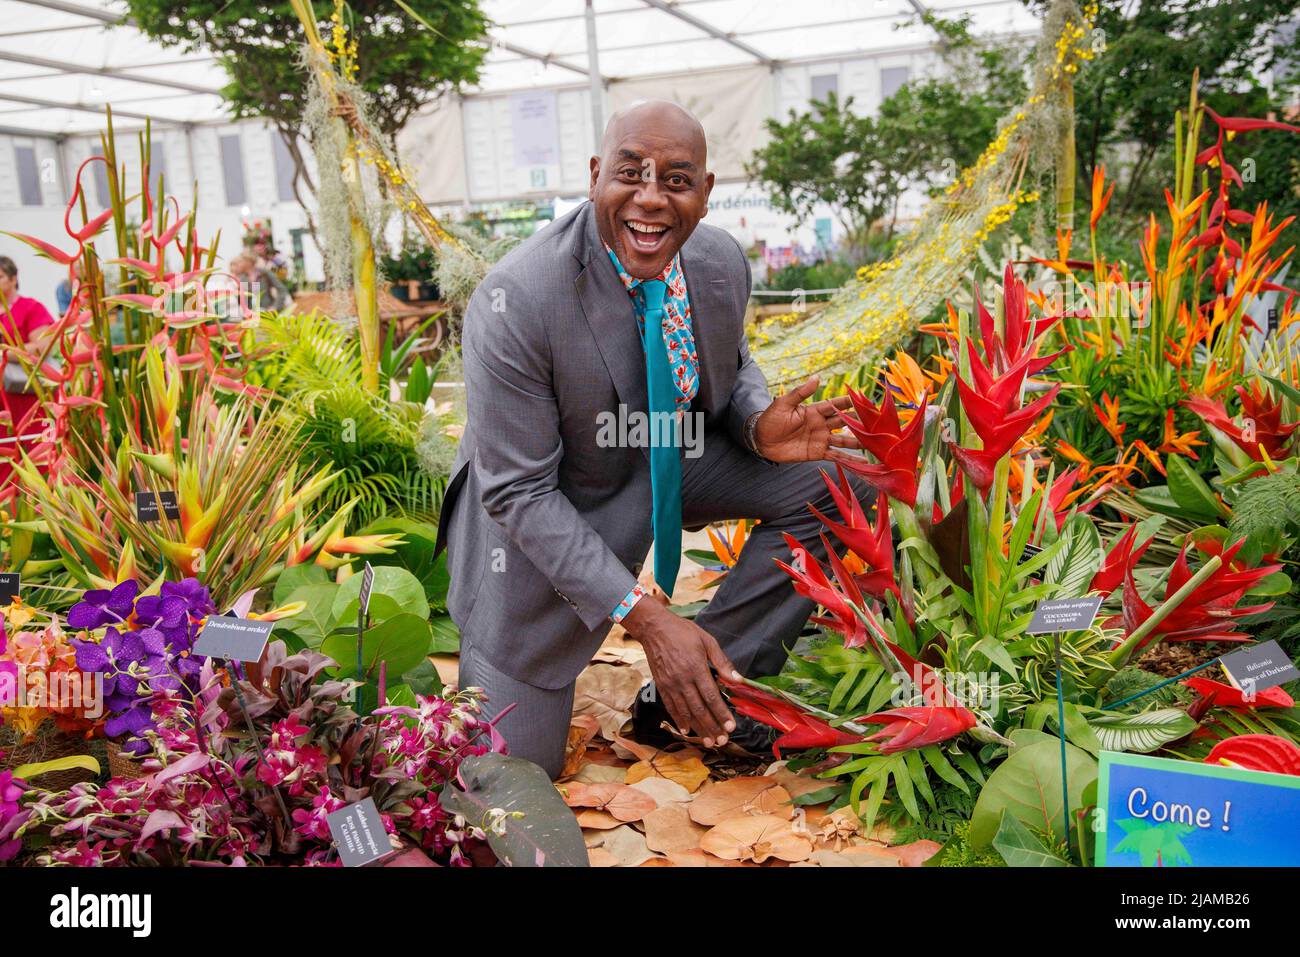 English chef and television presenter, Ainsley Harriott, in the Caribbean garden at the RHS Chelsea Flower Show Stock Photo